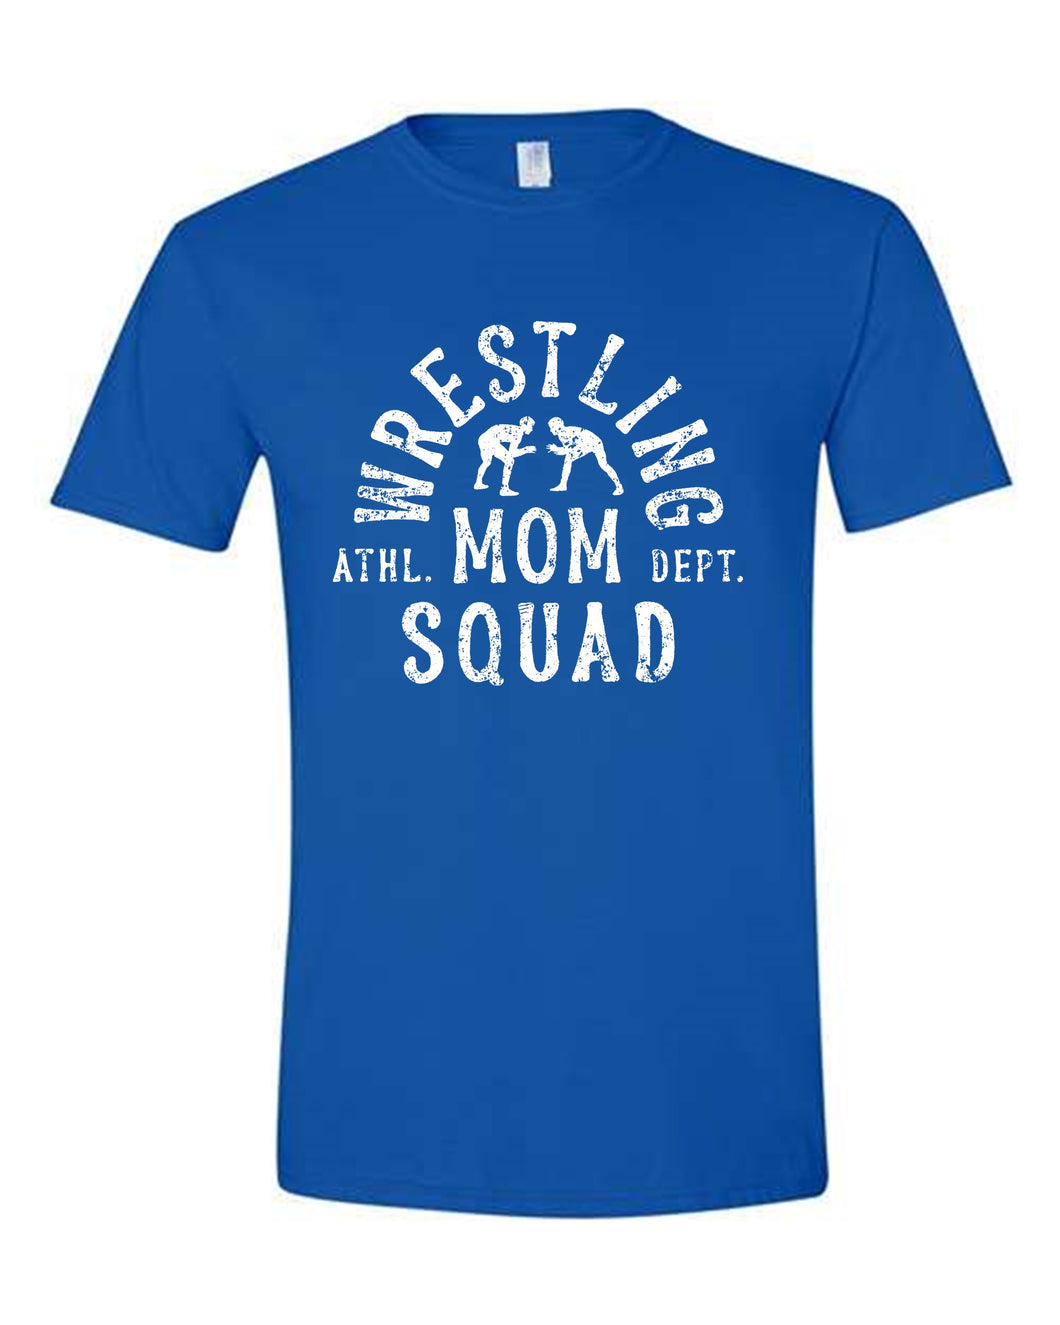 Wrestling Mom Squad - Click for Additional Styles (Youth and Adult)